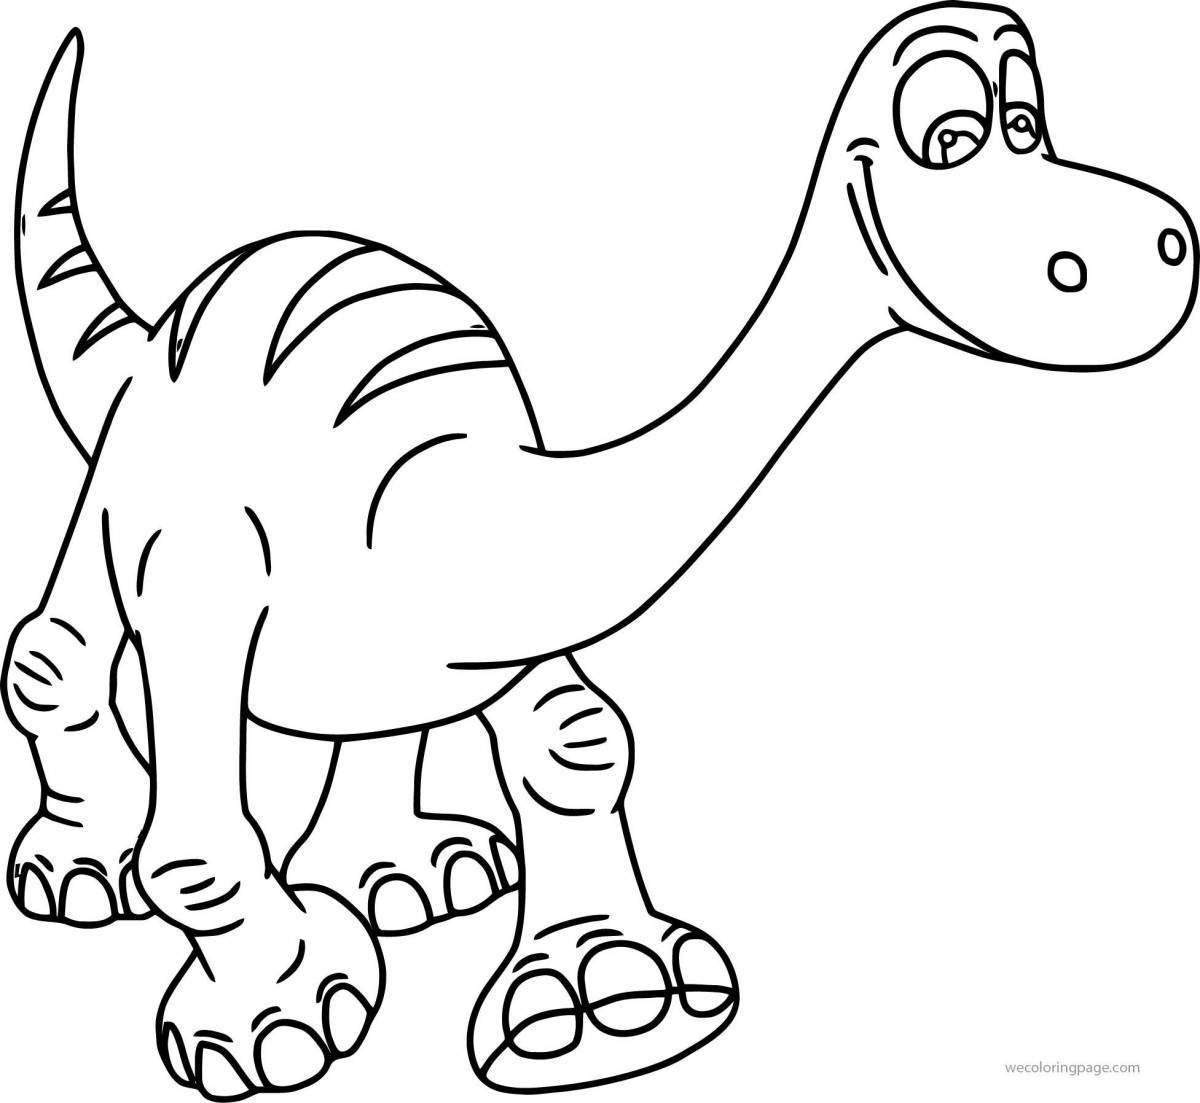 Dinosaur coloring book for 3-4 year olds